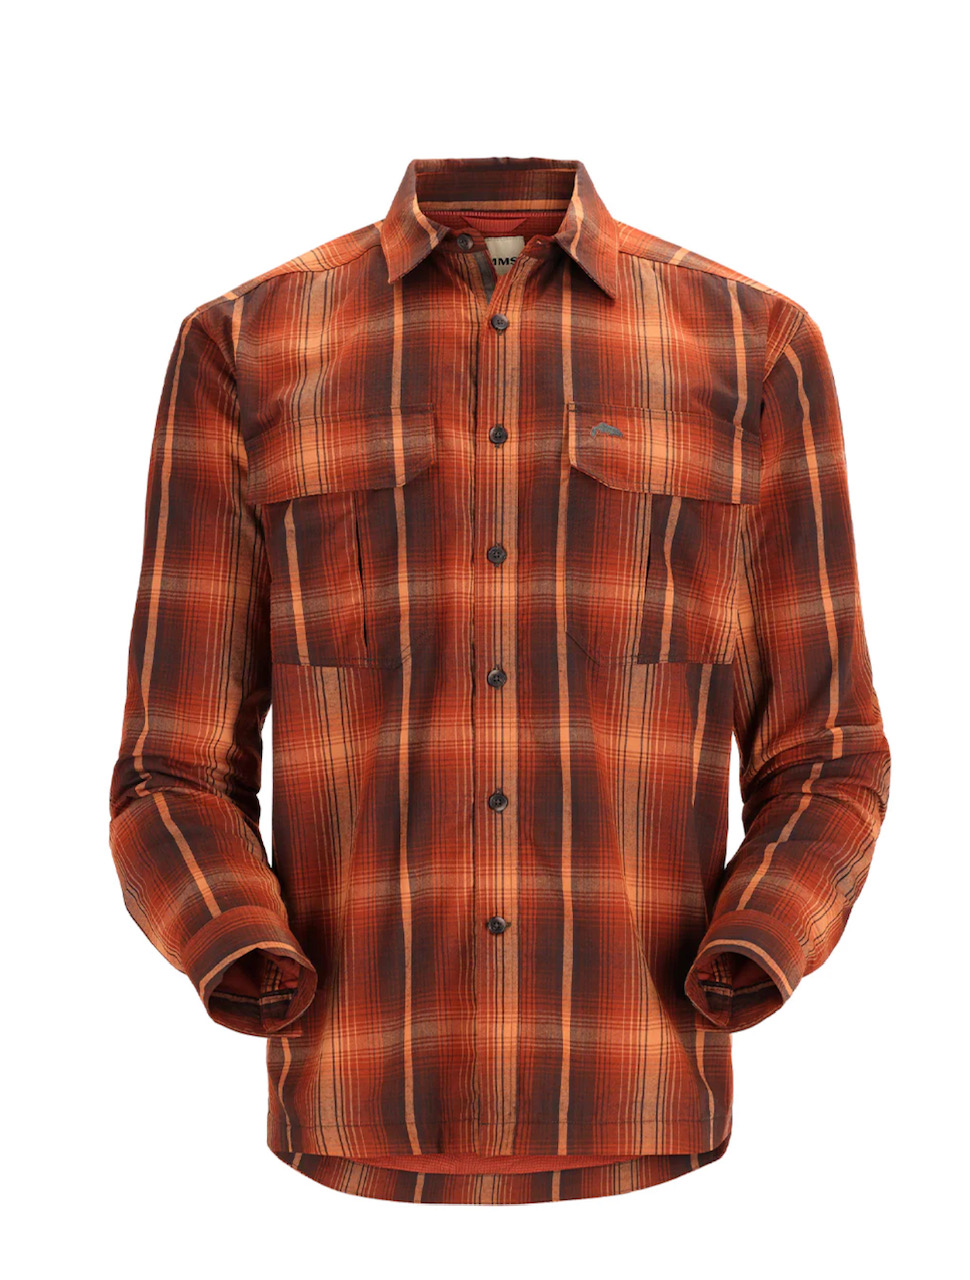 Simms M's Coldweather L/S Shirt - Hickory Clay - XXL